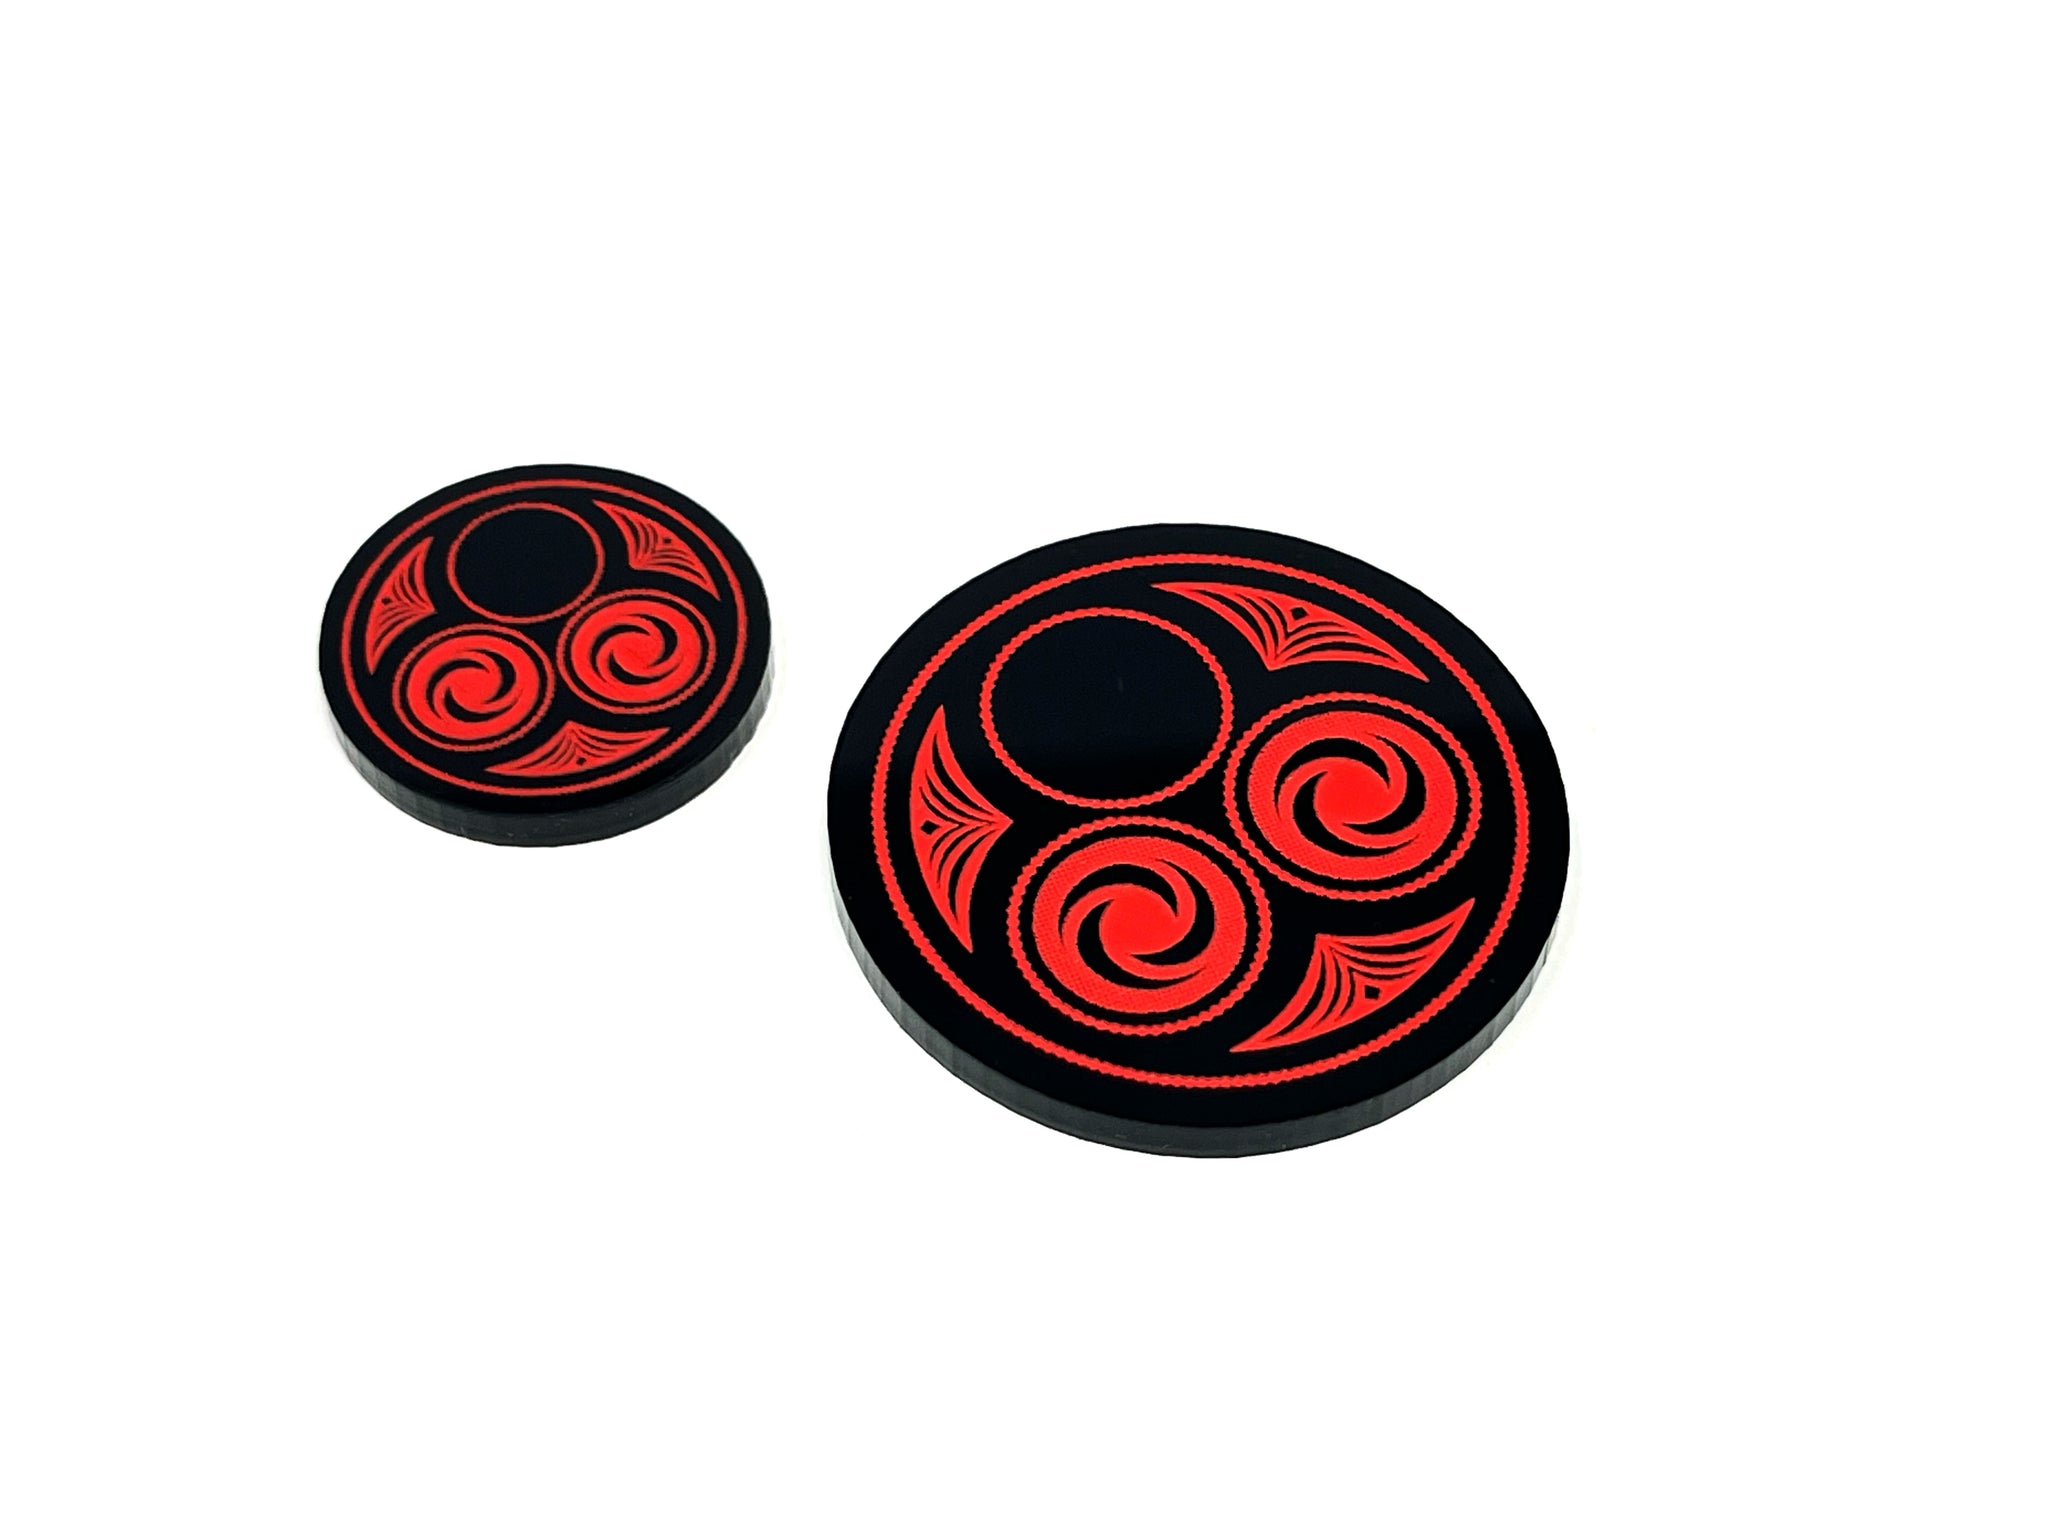 1 x Oversized 1/2 Resource Tracker Token (double sided) for Flesh and Blood TCG